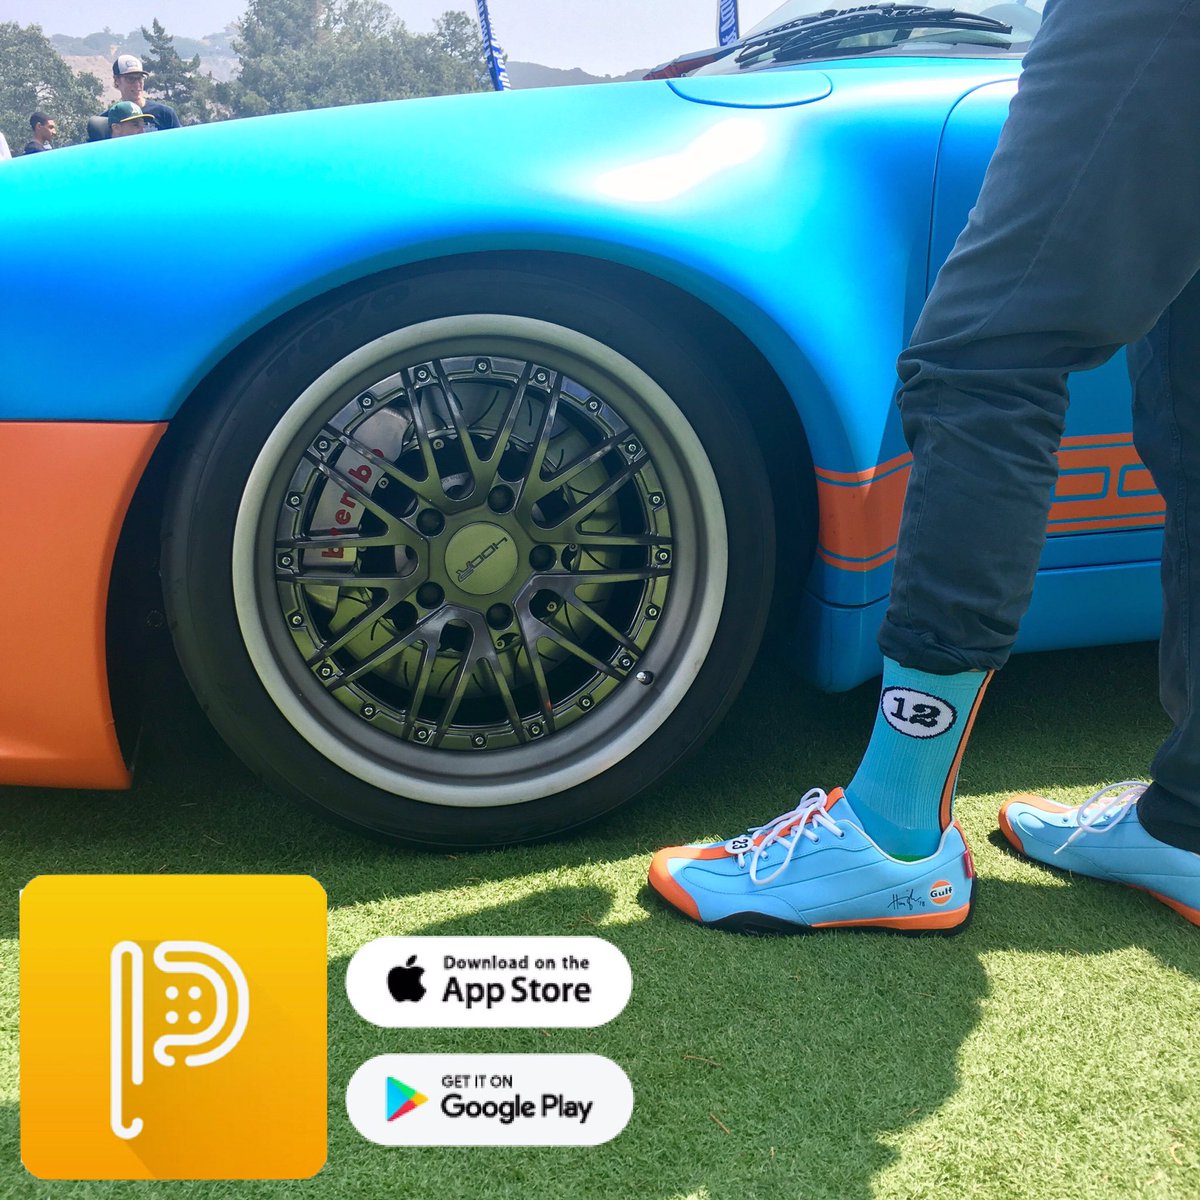 1️⃣ PEDAL was at Monterey Car Week. Login to the PEDAL app to see all the pics & video from the events
2️⃣ We had so many ask about our awesome shoes & socks. From PEDAL members: socks, @HeelSales & shoes from @HunzikerDesign - Checkout for all of their comfortable products!